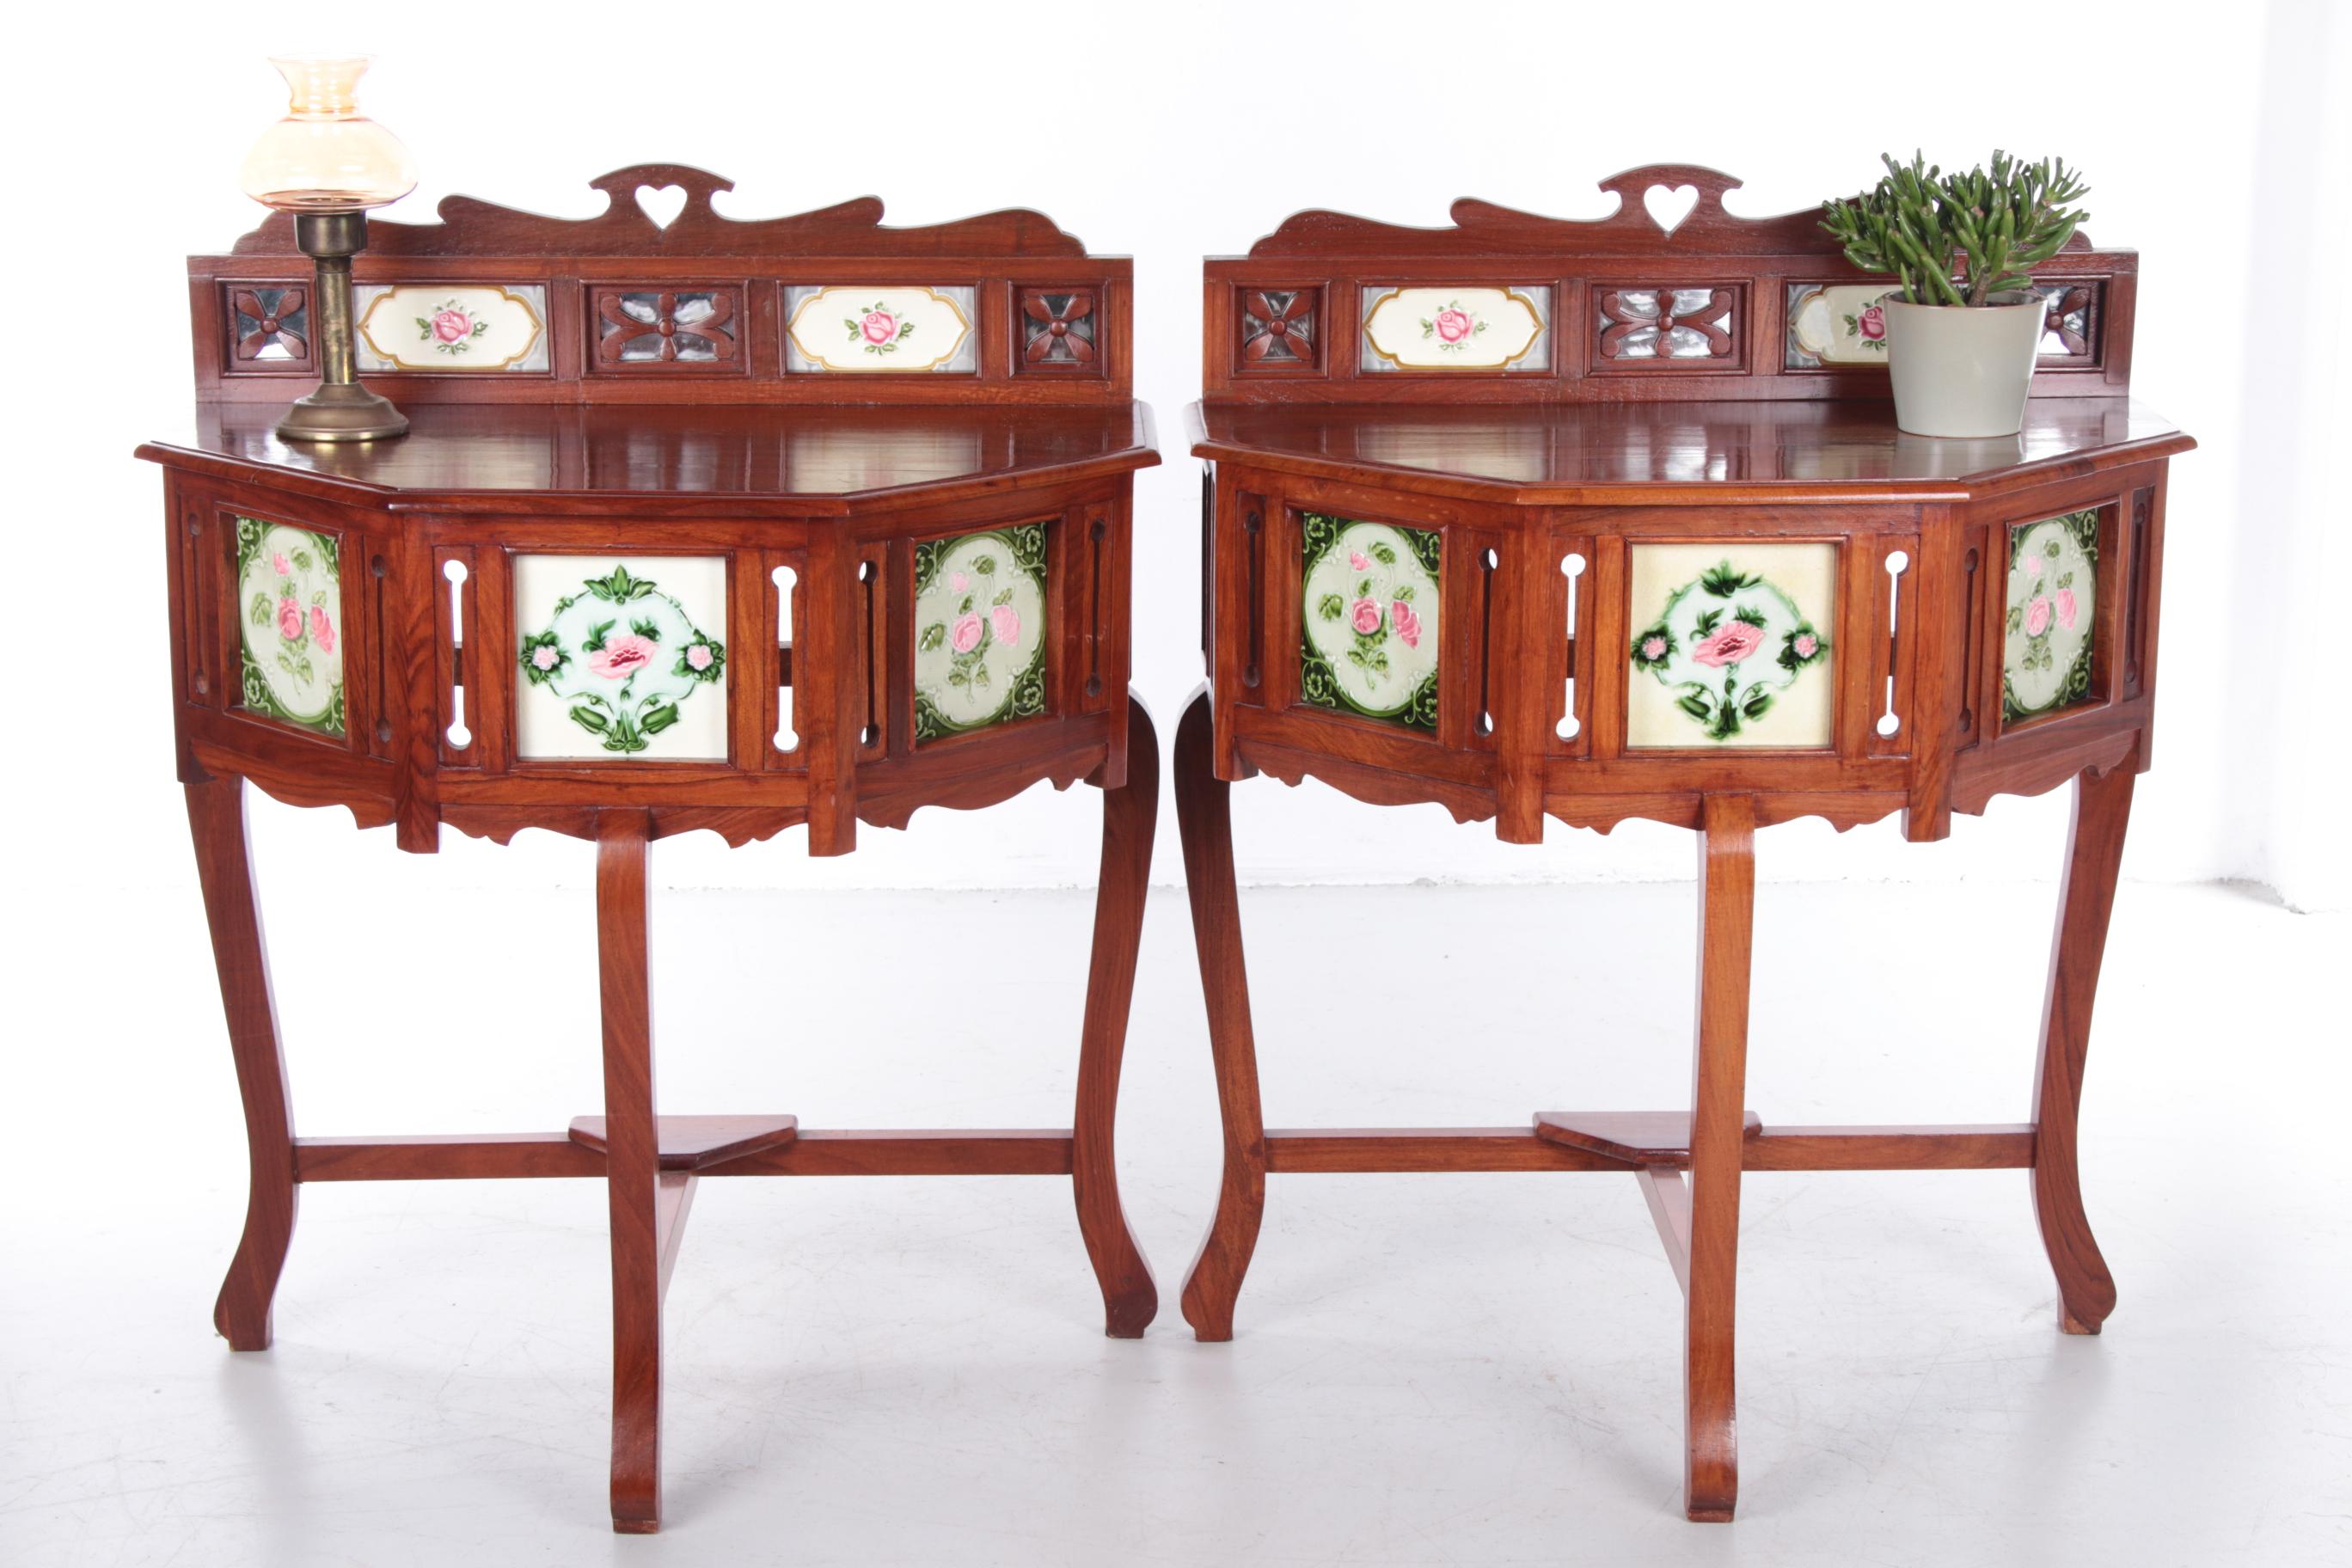 Set Portuguese Colonial wall nightstands by Meranti with Tiles, 1930

Two Portuguese colonial 3 angular merantie wall tables.

Two Portuguese colonial triangular meranti tables from the late 19th century from the Diu region on the west coast of